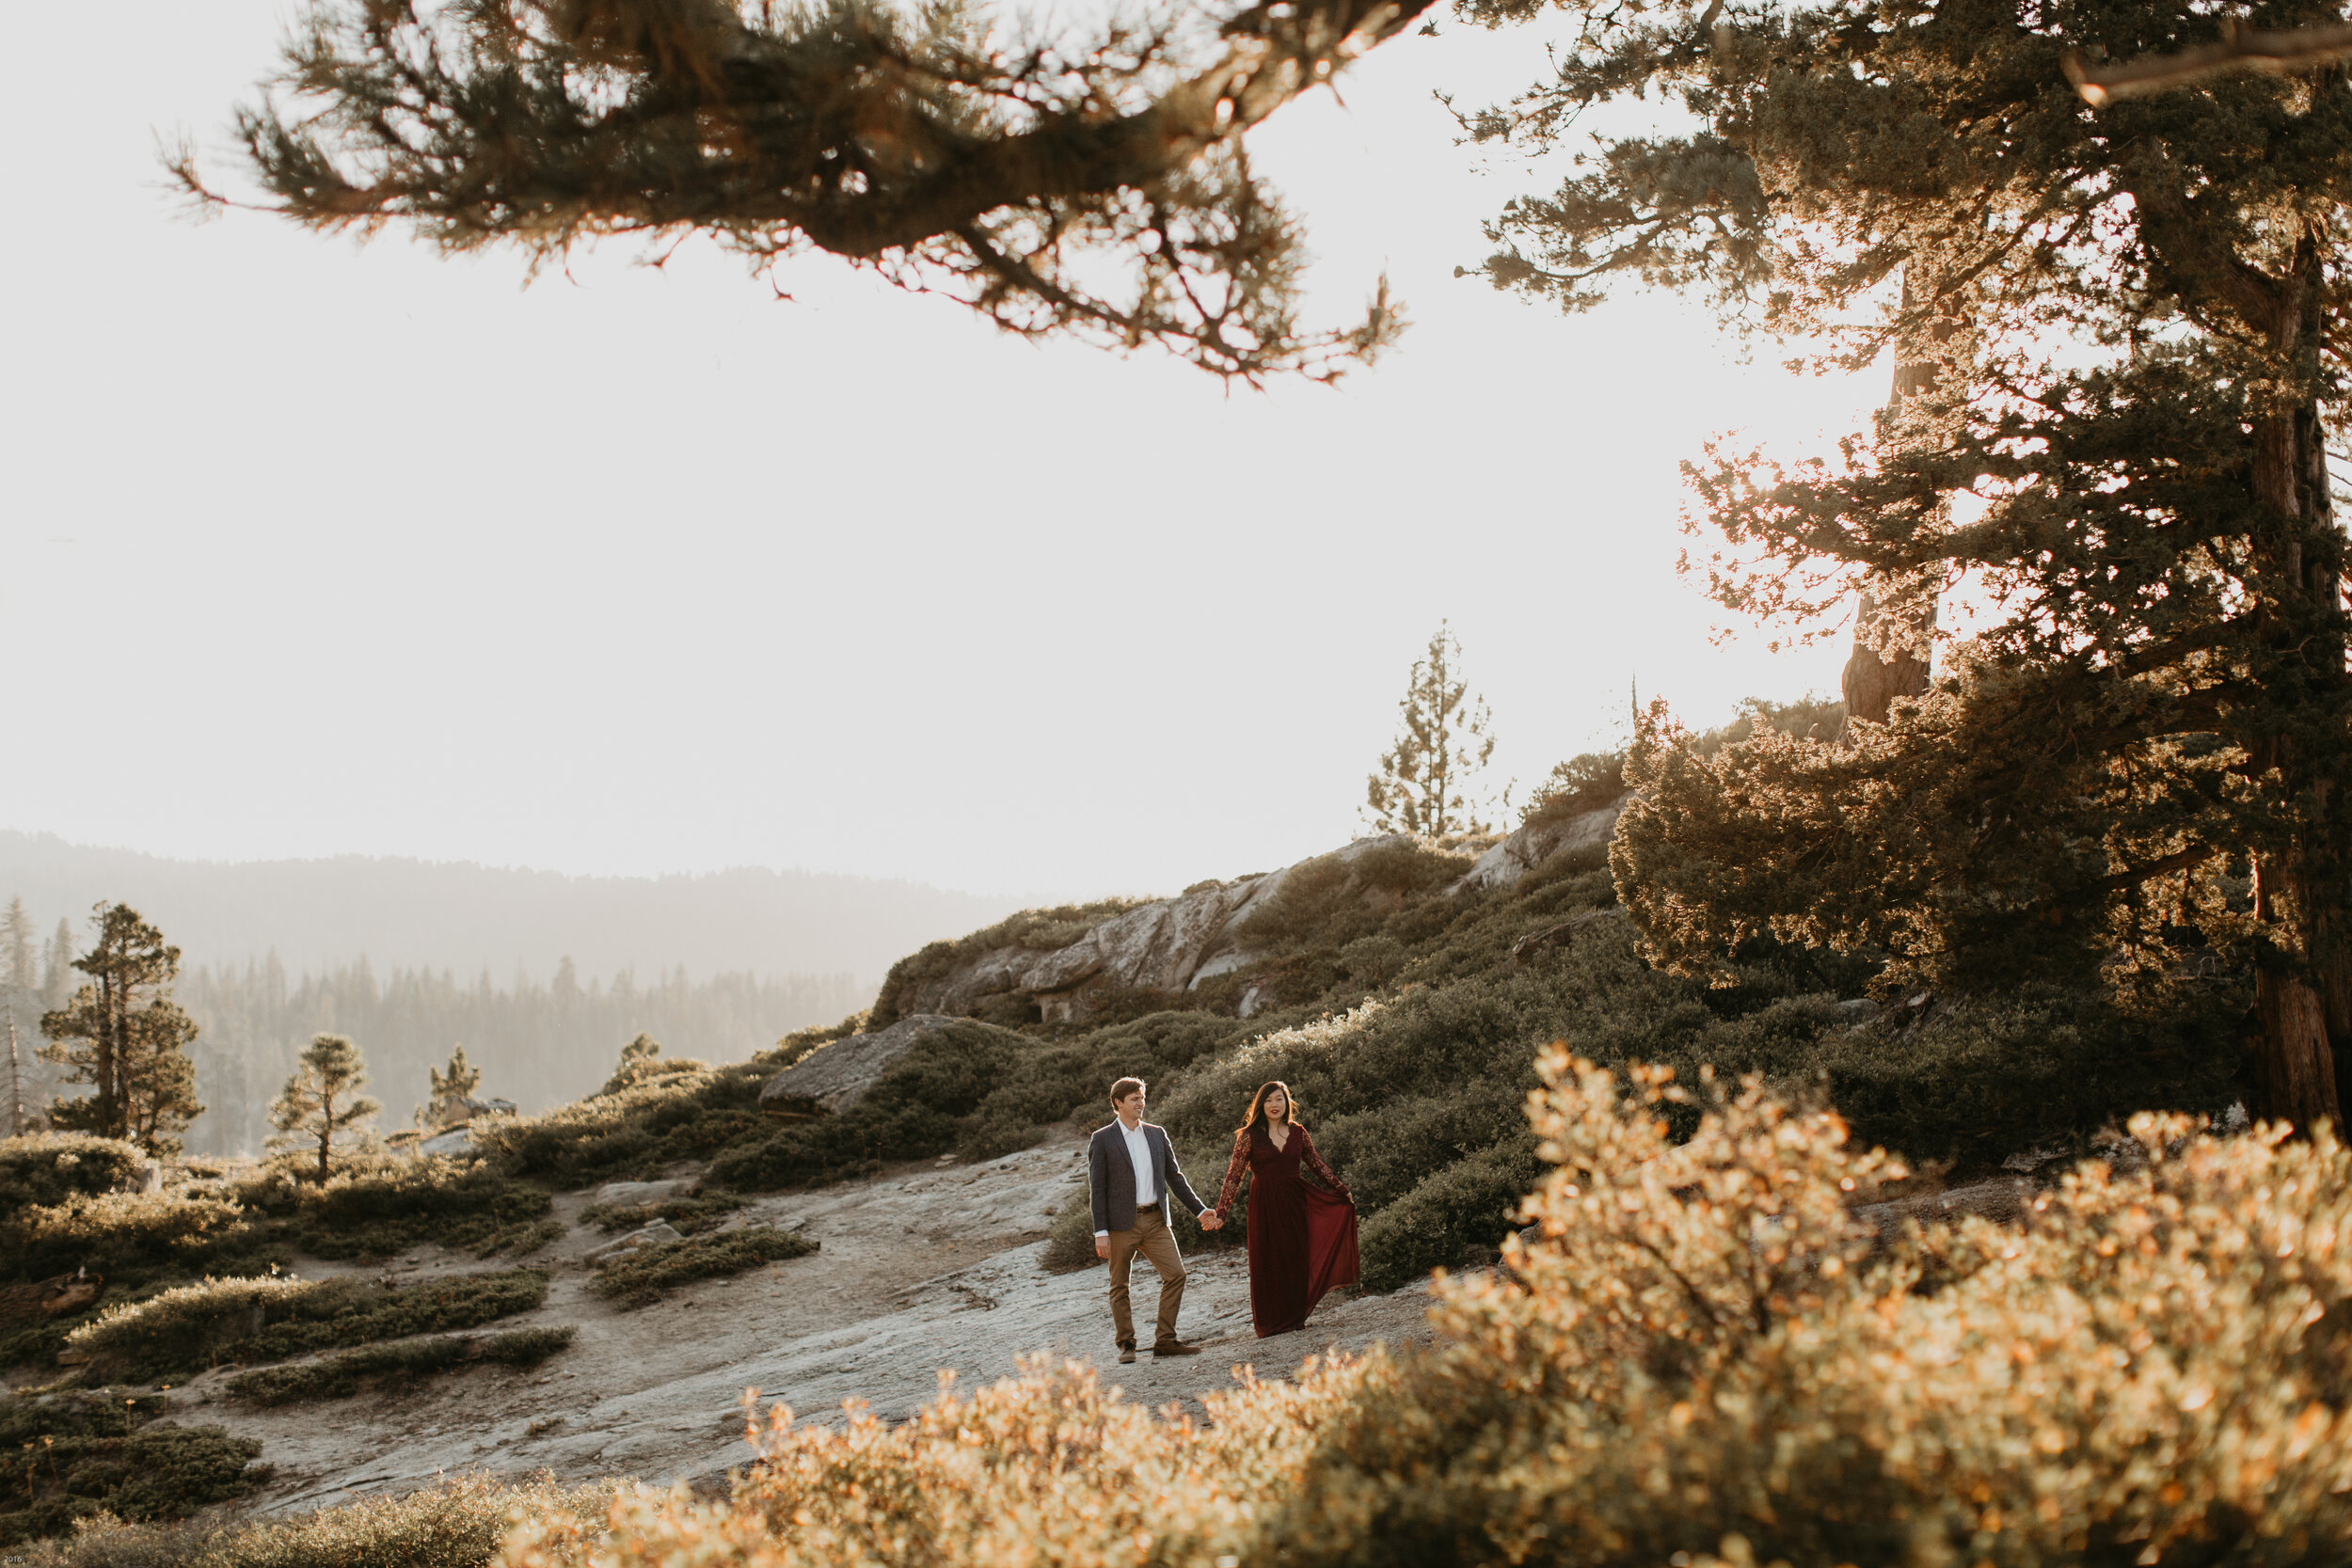 yosemite-national-park-couples-session-at-taft-point-and-yosemite-valley-yosemite-elopement-photographer-nicole-daacke-photography-126.jpg